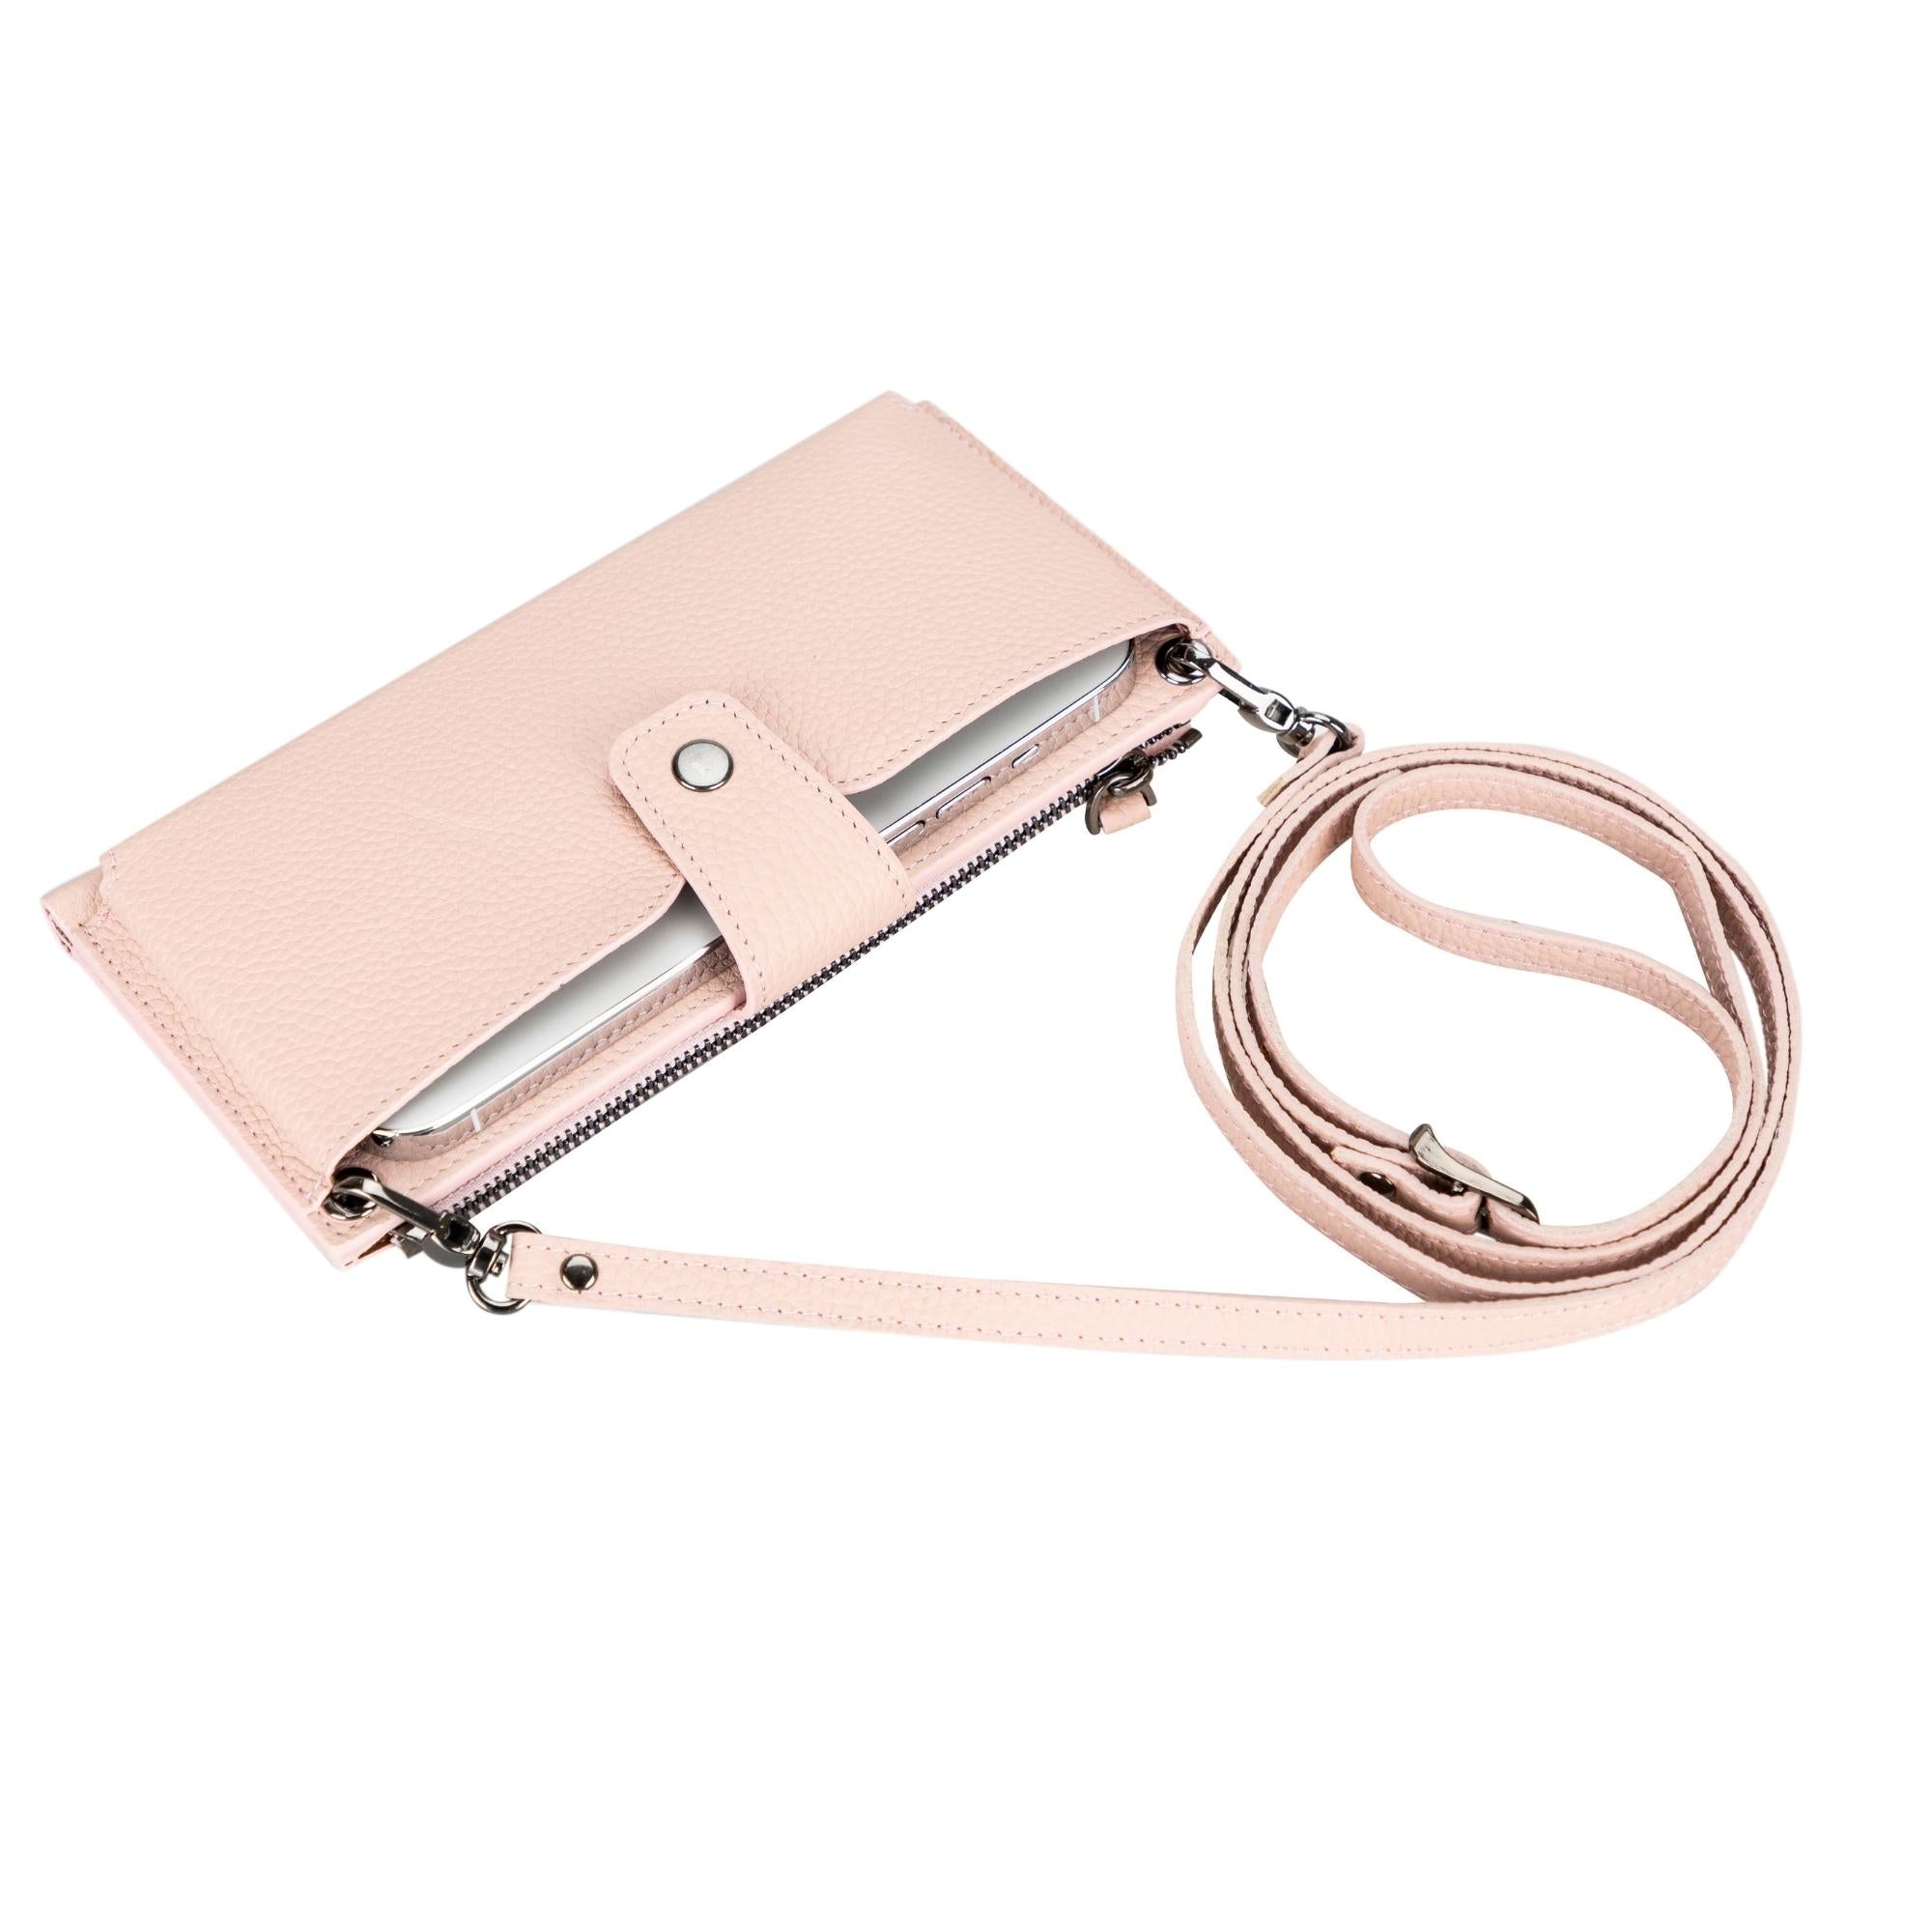 Kaycee Leather Women's Cell Phone Wallet with Strap - Pink - 6.9" - TORONATA